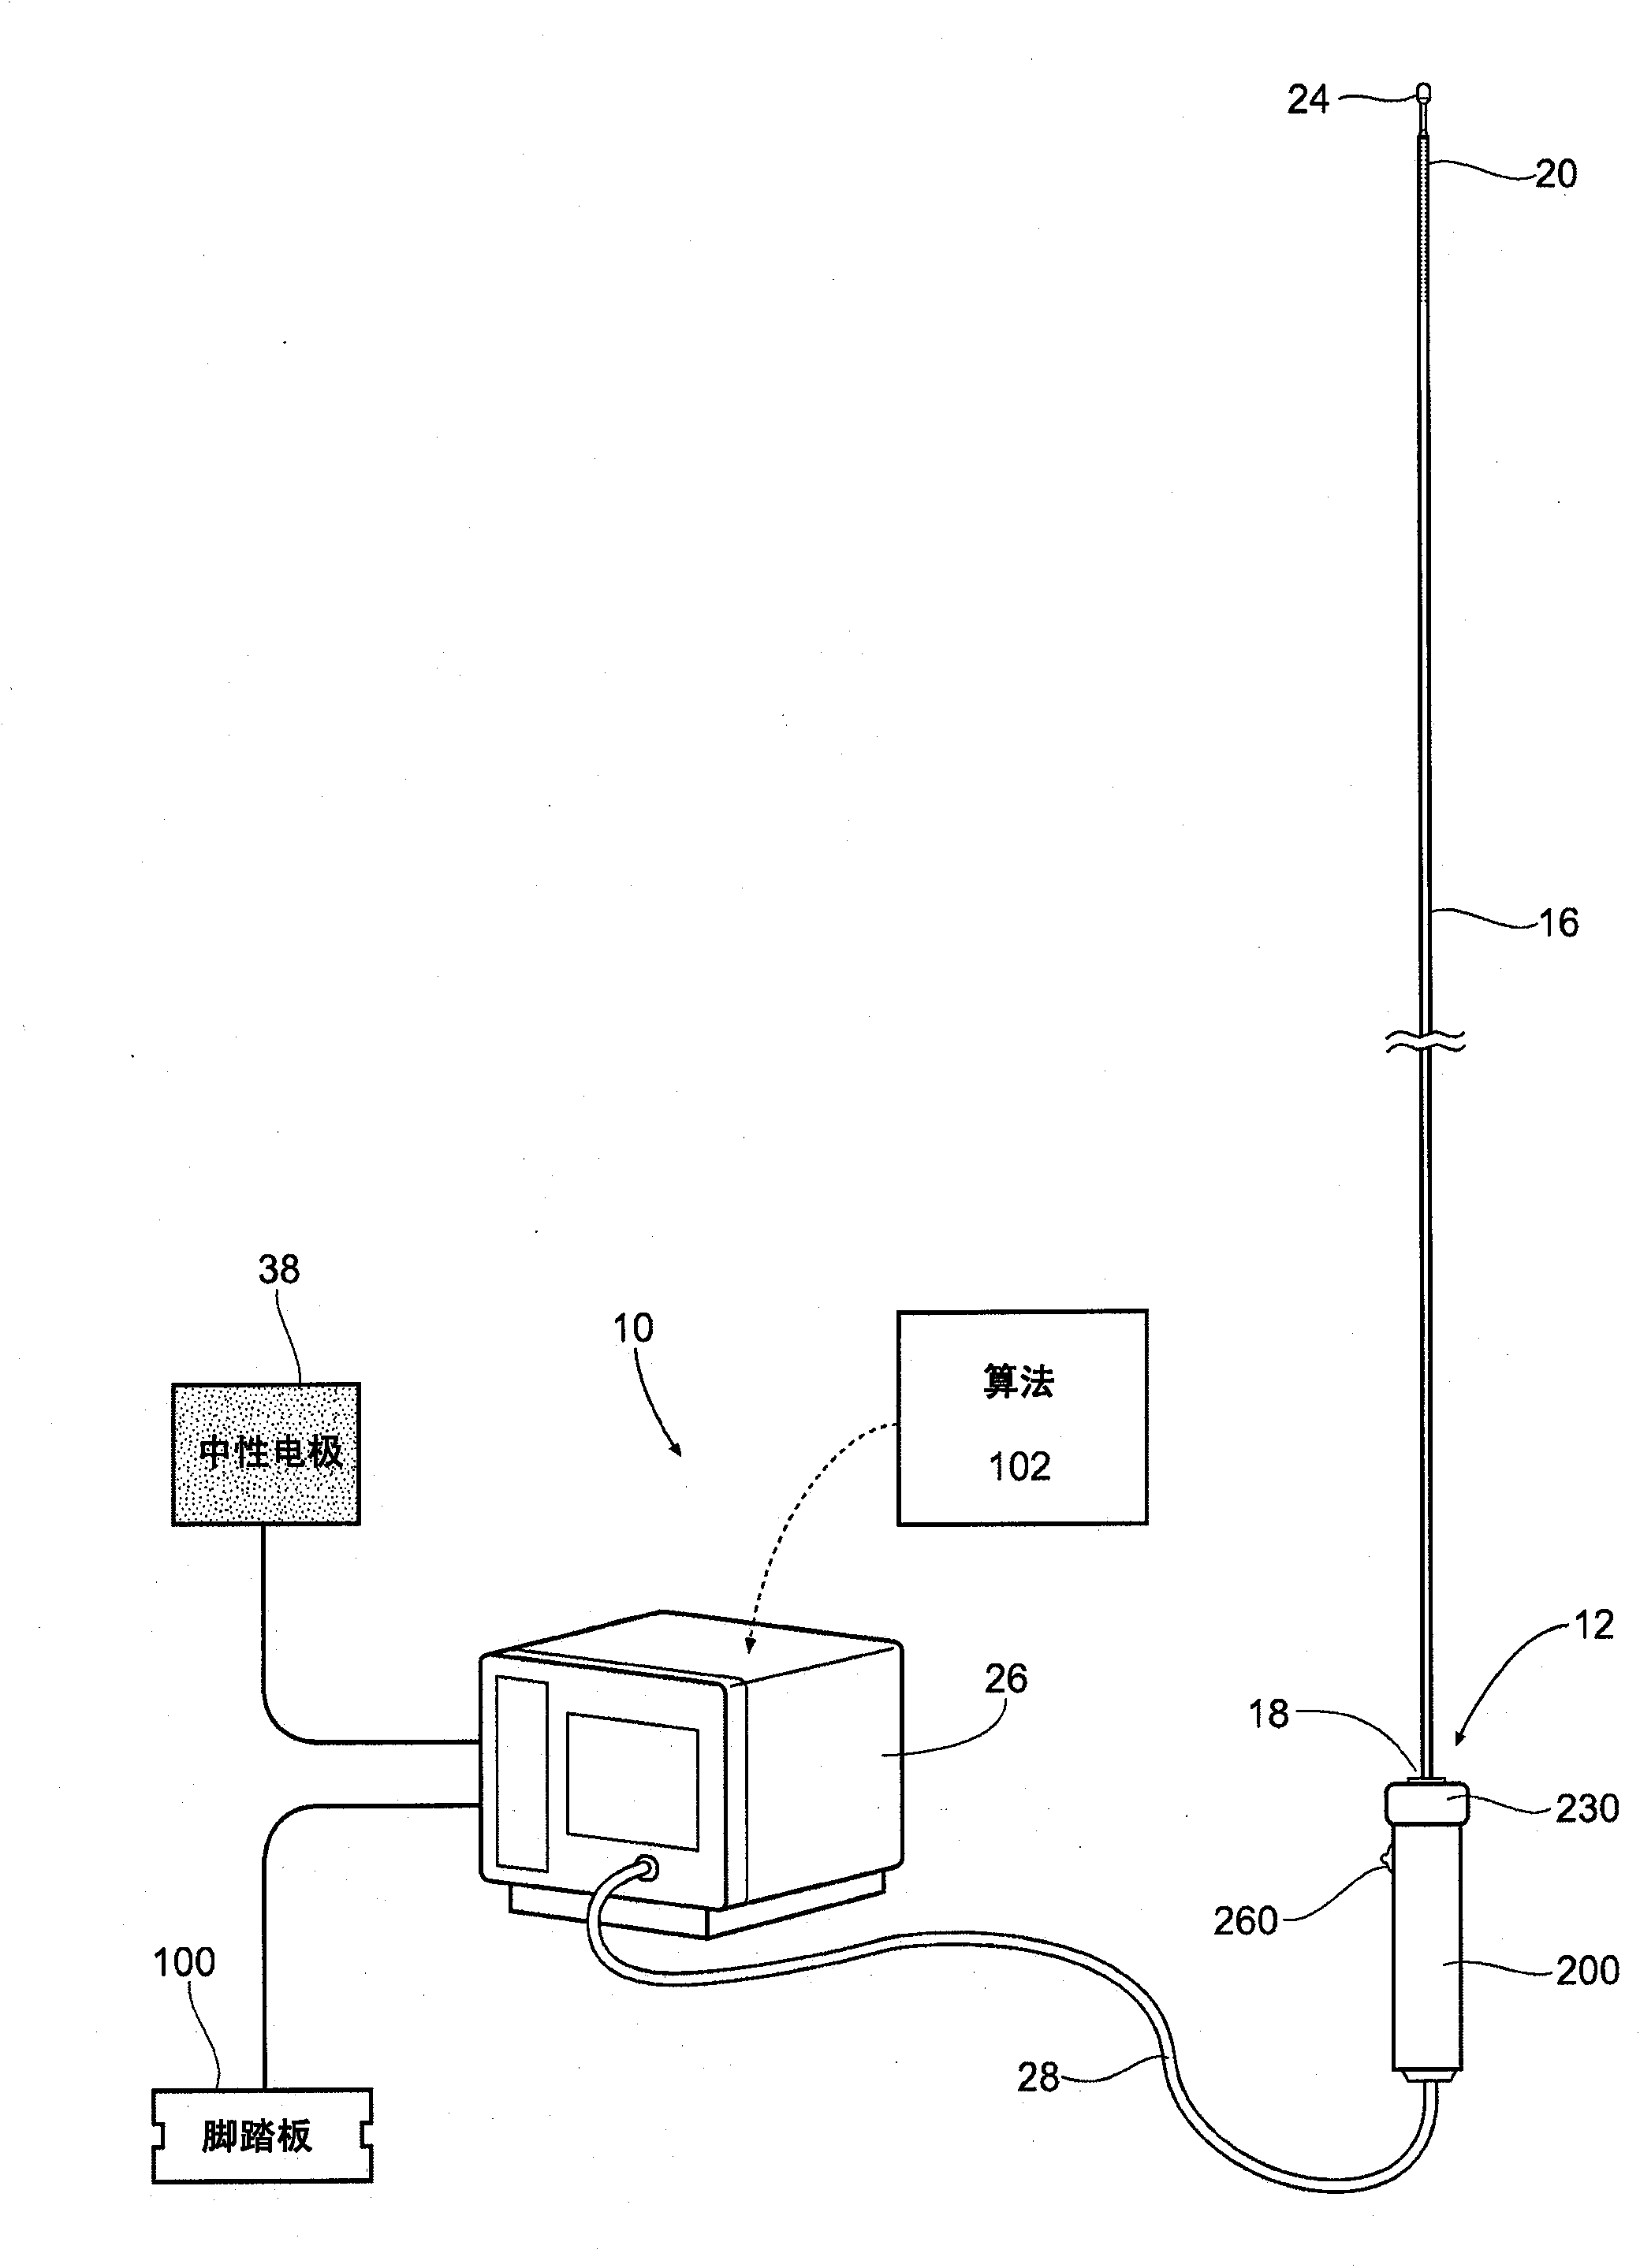 Apparatus, systems and methods for achieving intravascular, thermally-induced renal neuromodulation